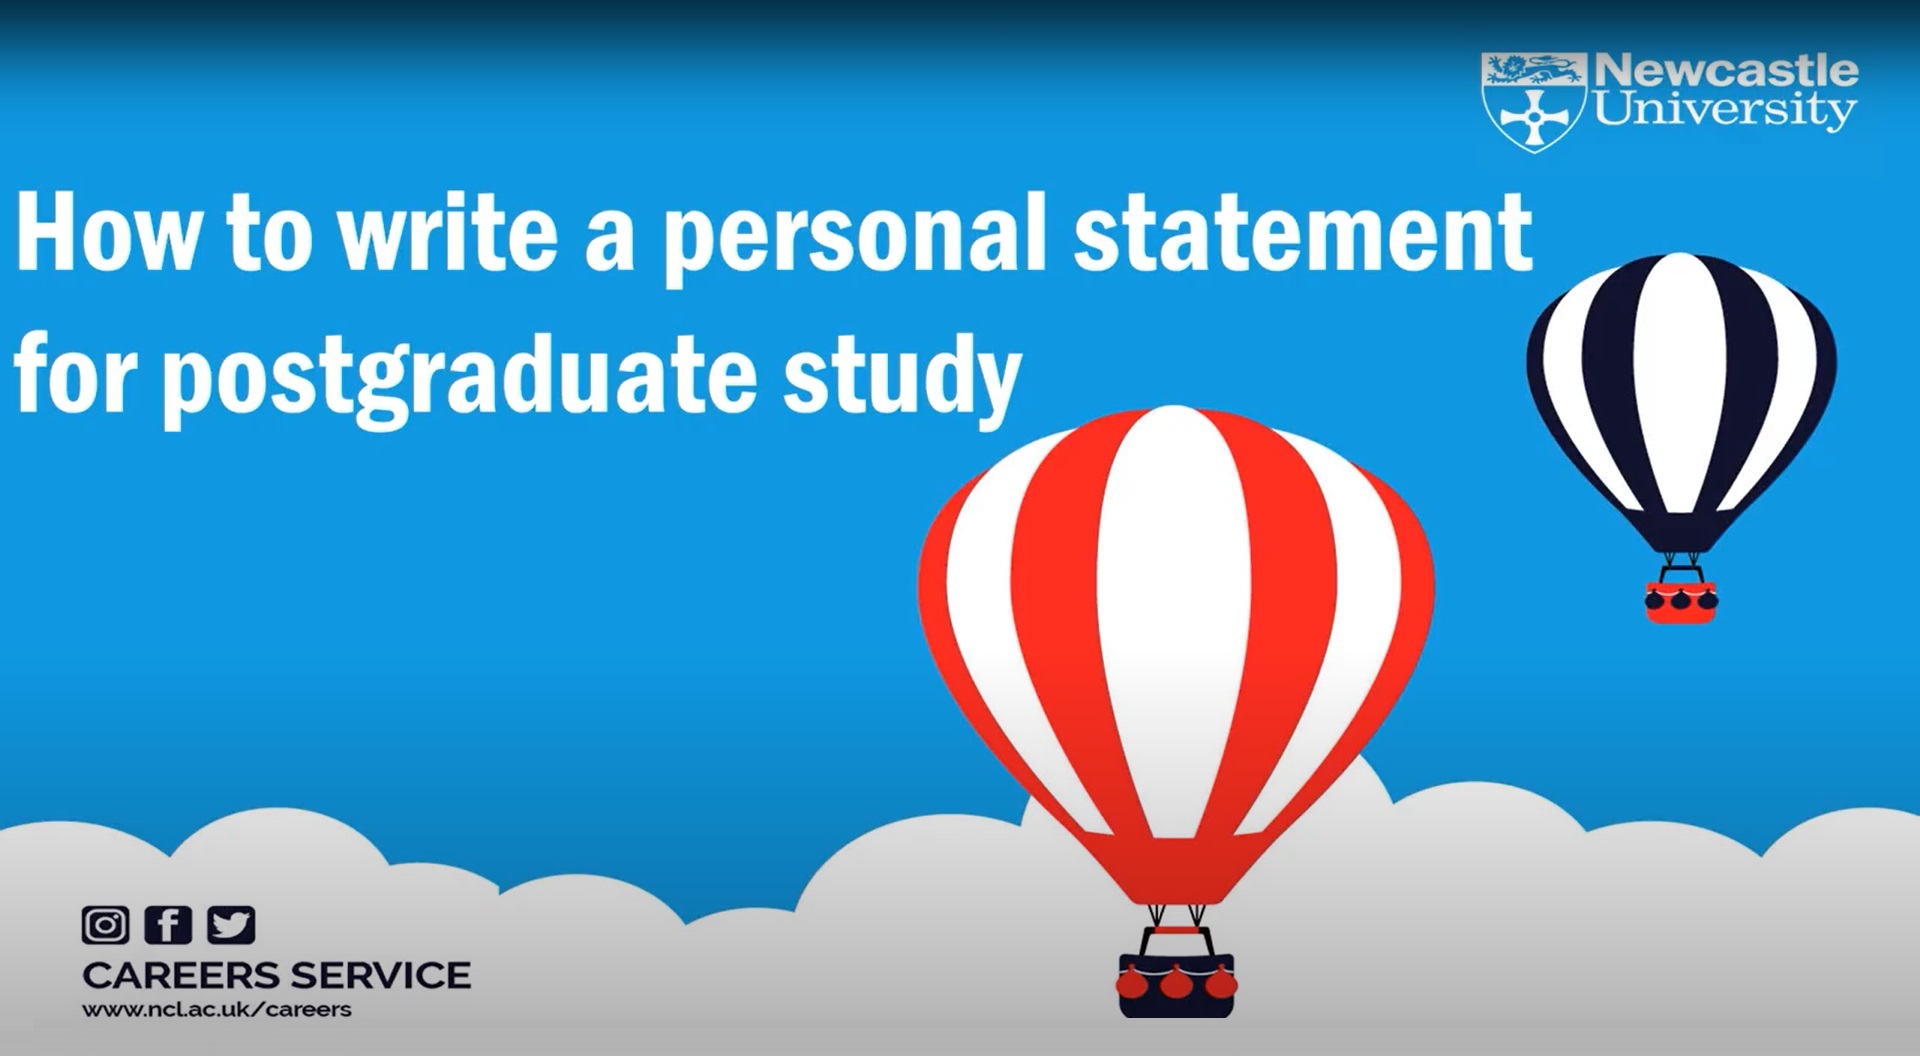 Screenshot from the title page of our How to write a personal statement for postgraduate study online masterclass presentation